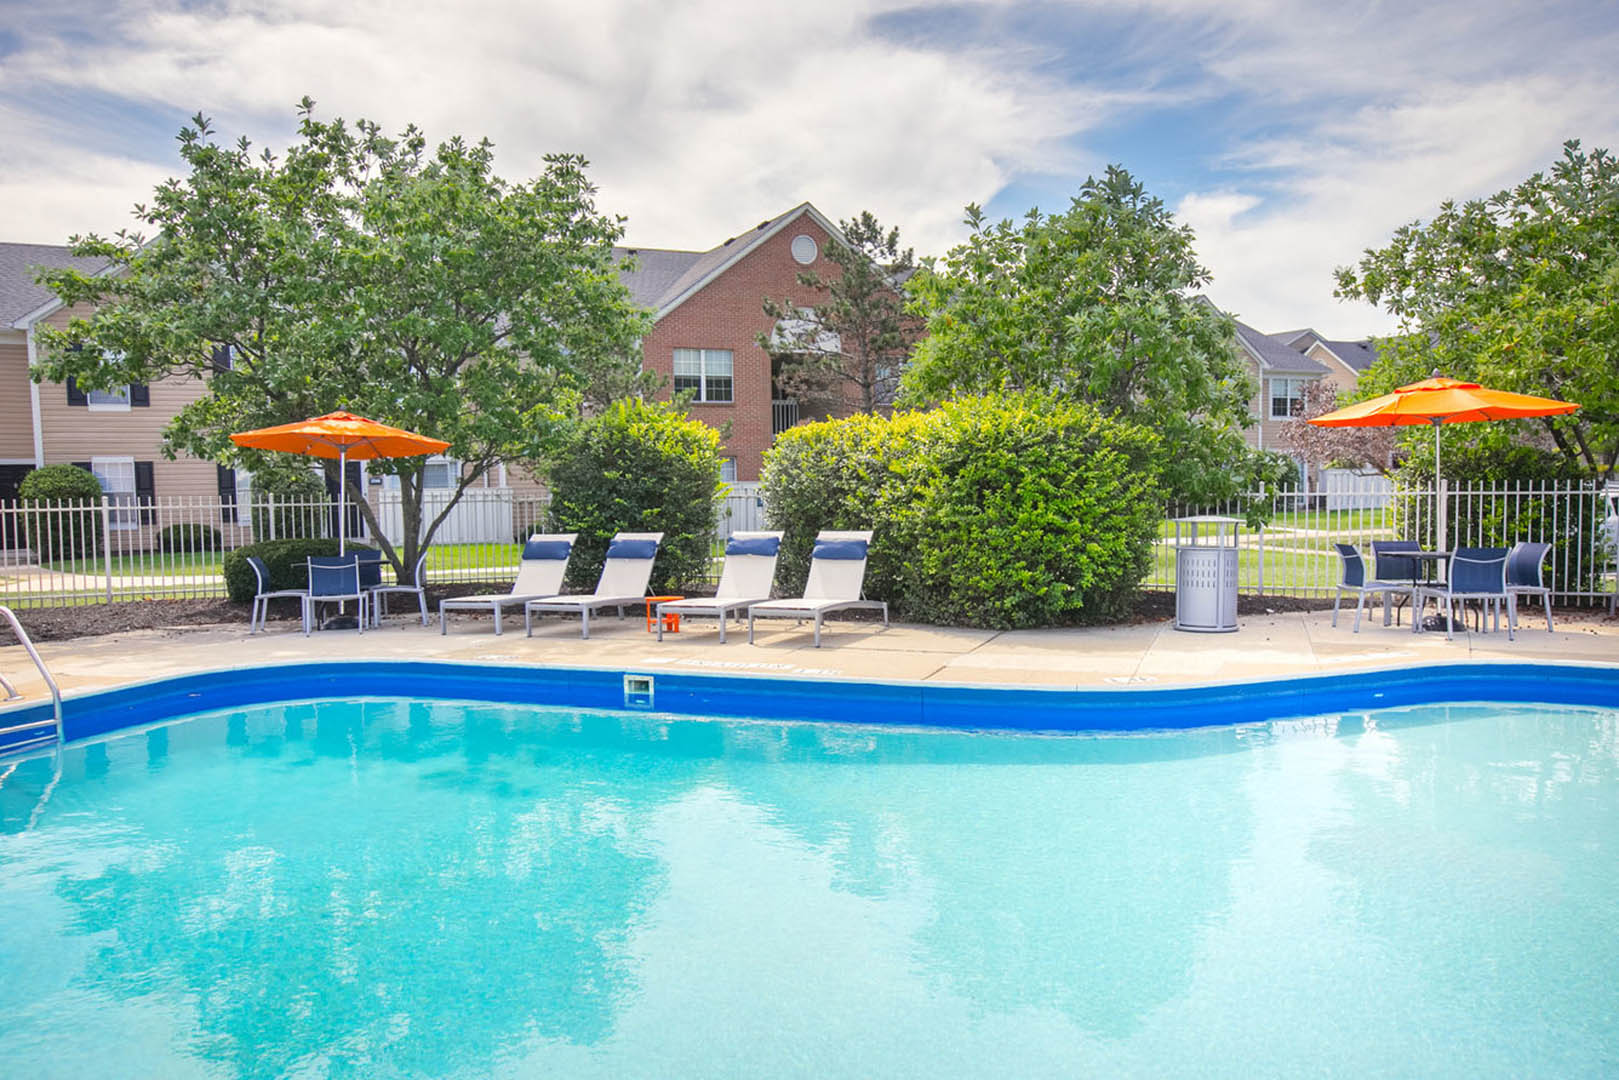 Pool area at Bedford Commons Apartments & Heathermoor Apartments, Columbus, OH